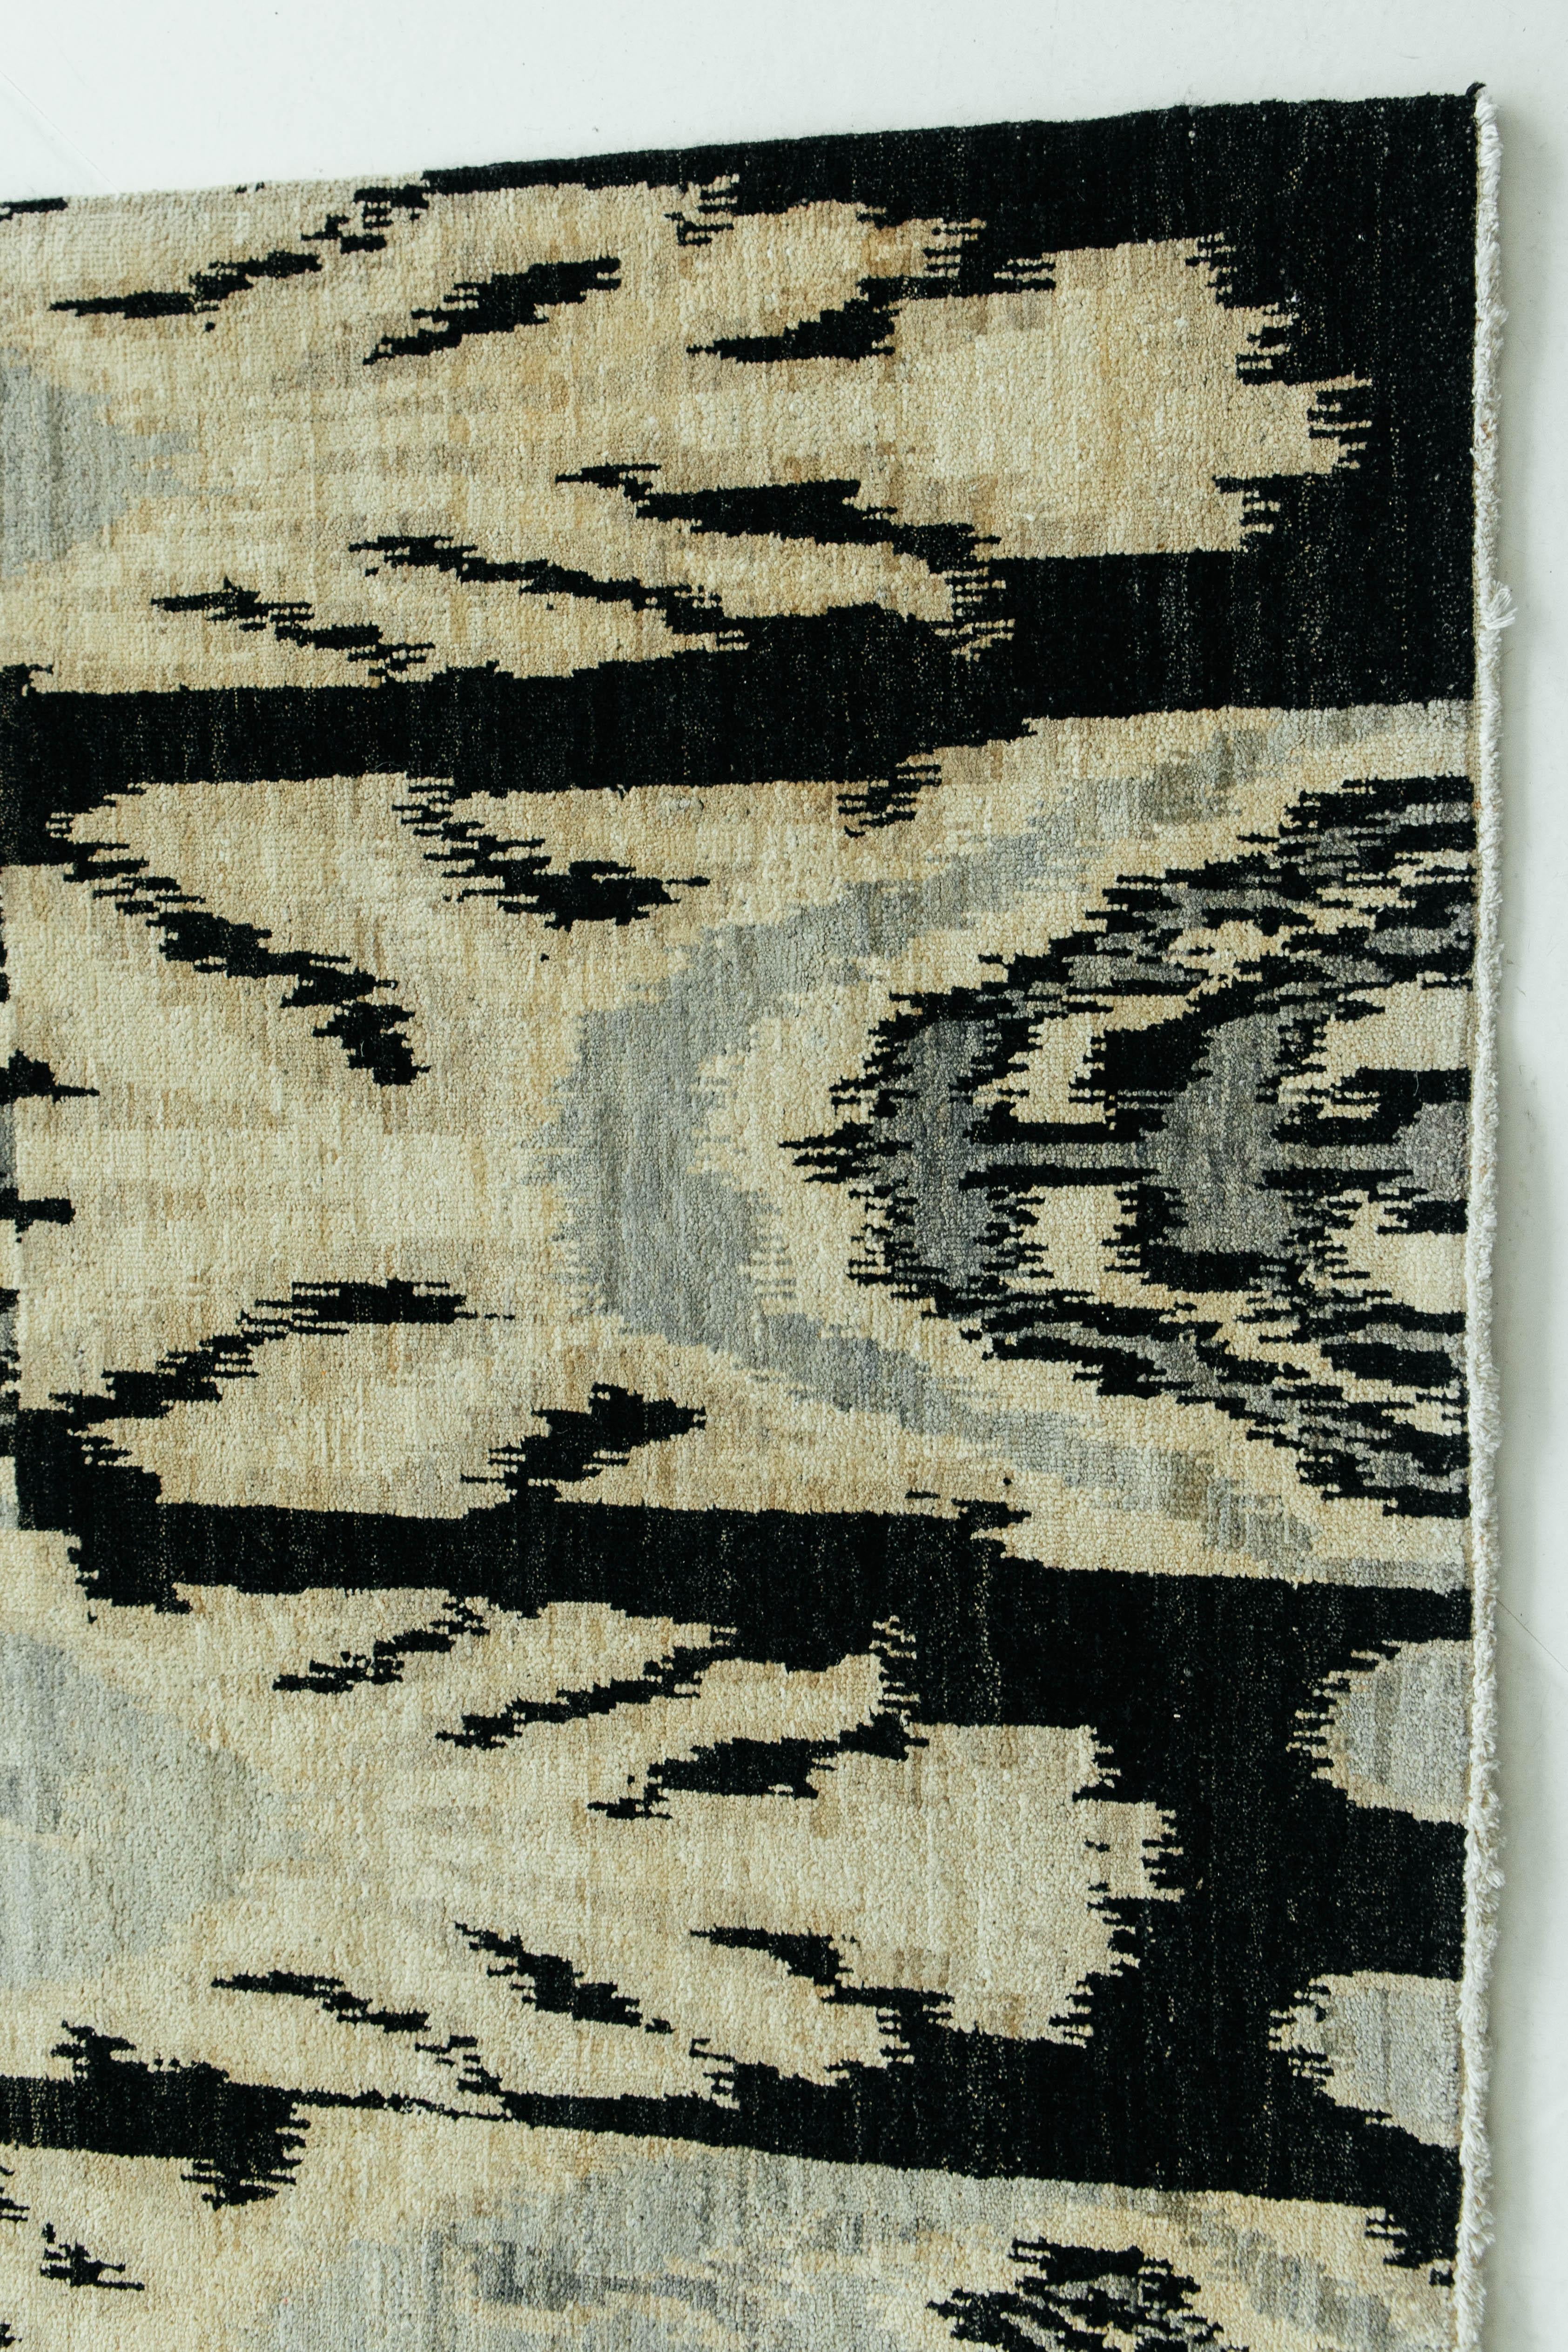 'Zanda' is a luxurious Ikat pile weave in black, ivory, and light blue. Its playfully bold design will elevate any design space and leave lasting impressions. Ikat designs have been globally inspired for today's modern design world

Rug number: